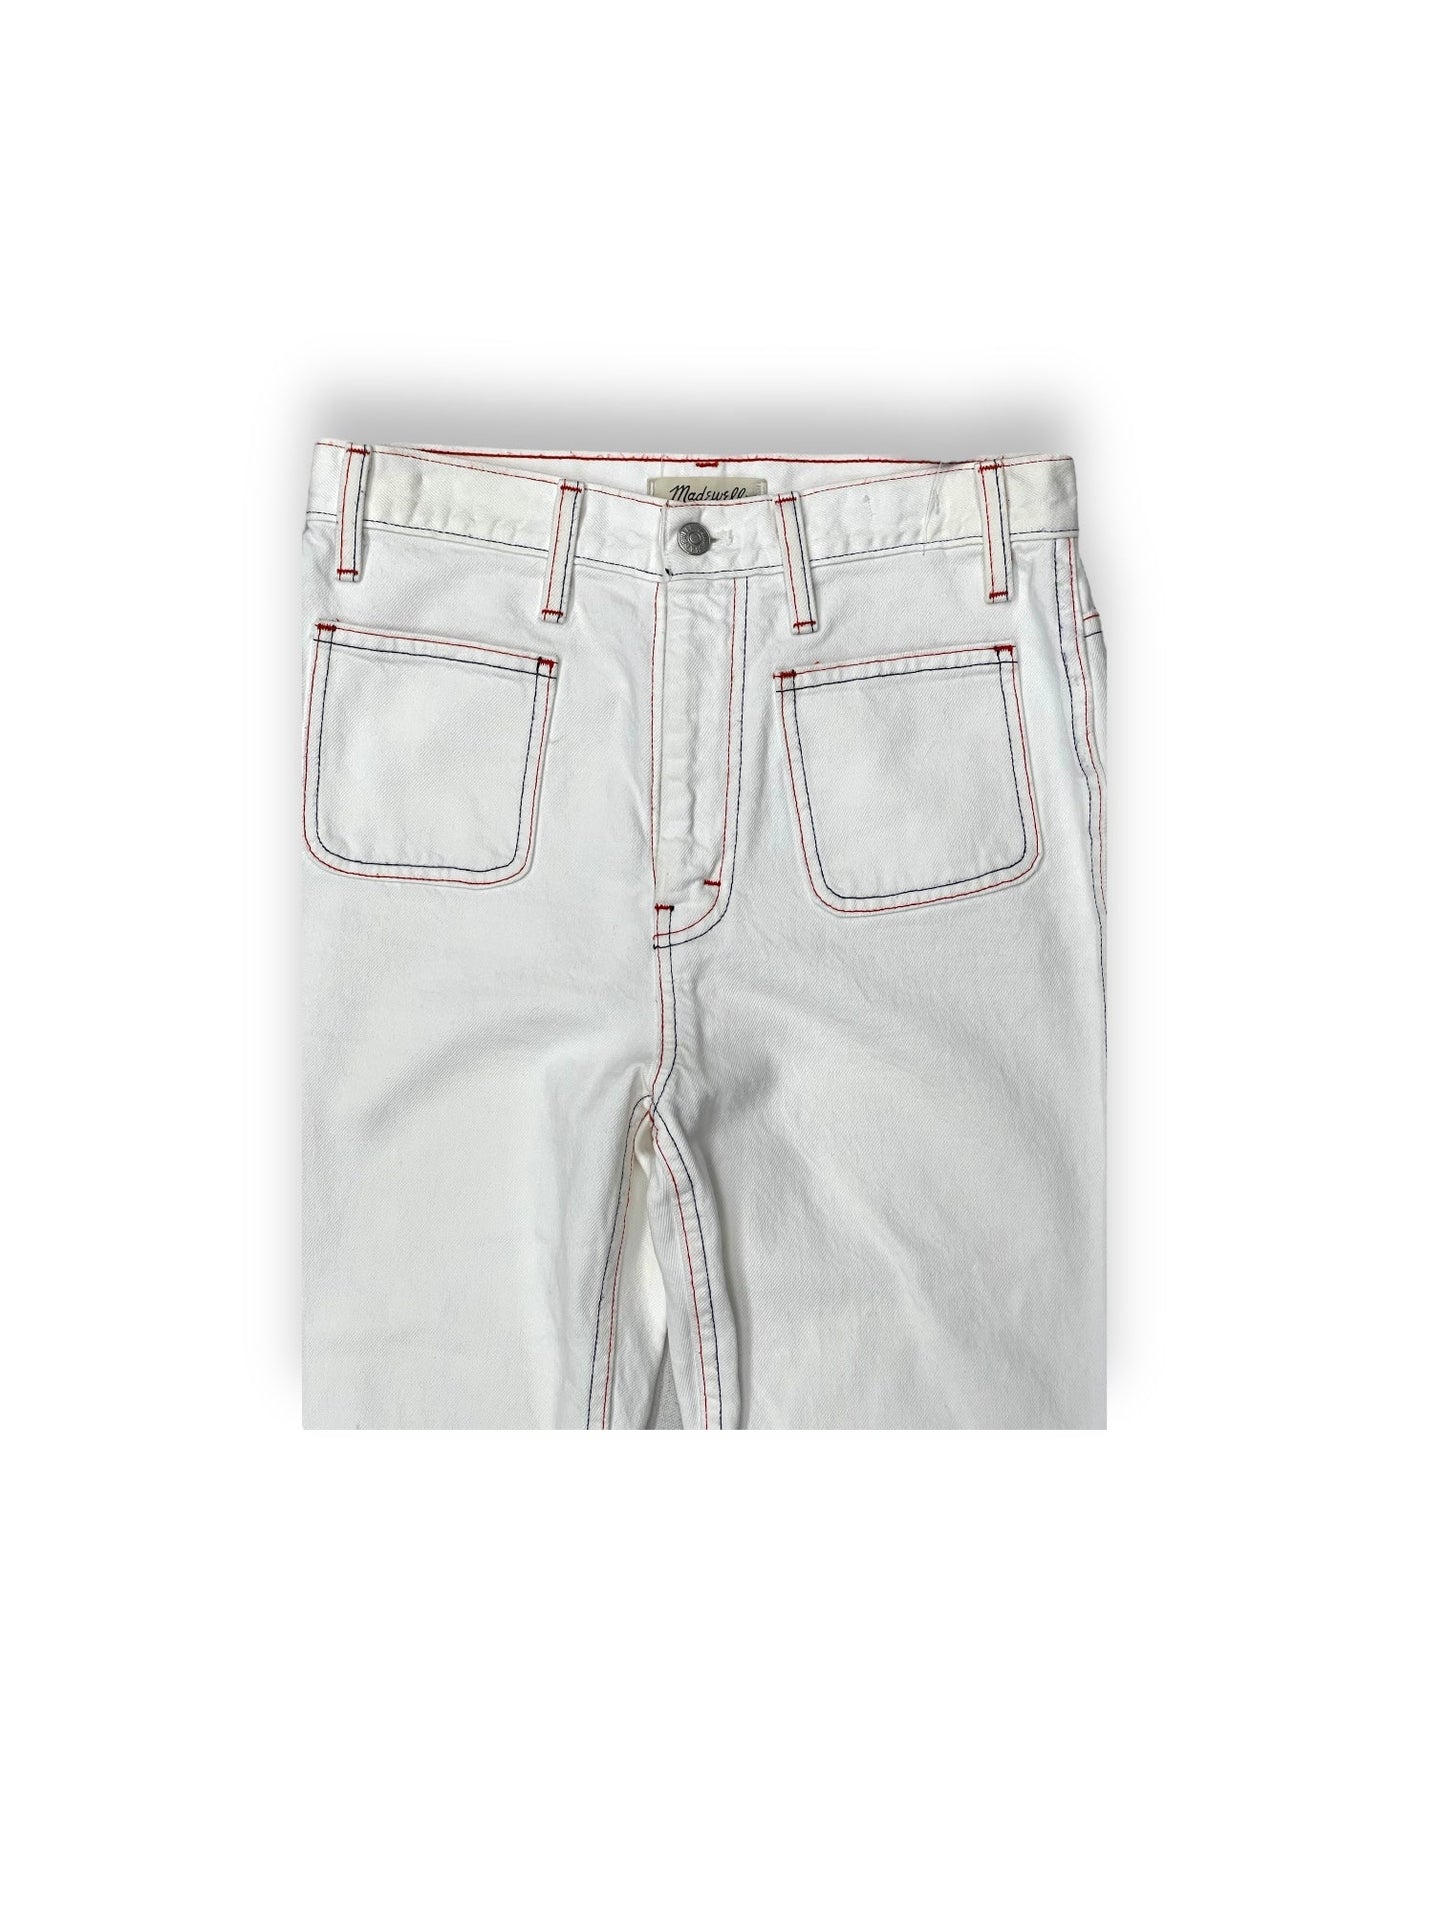 White Jeans Cropped Madewell, Size 27